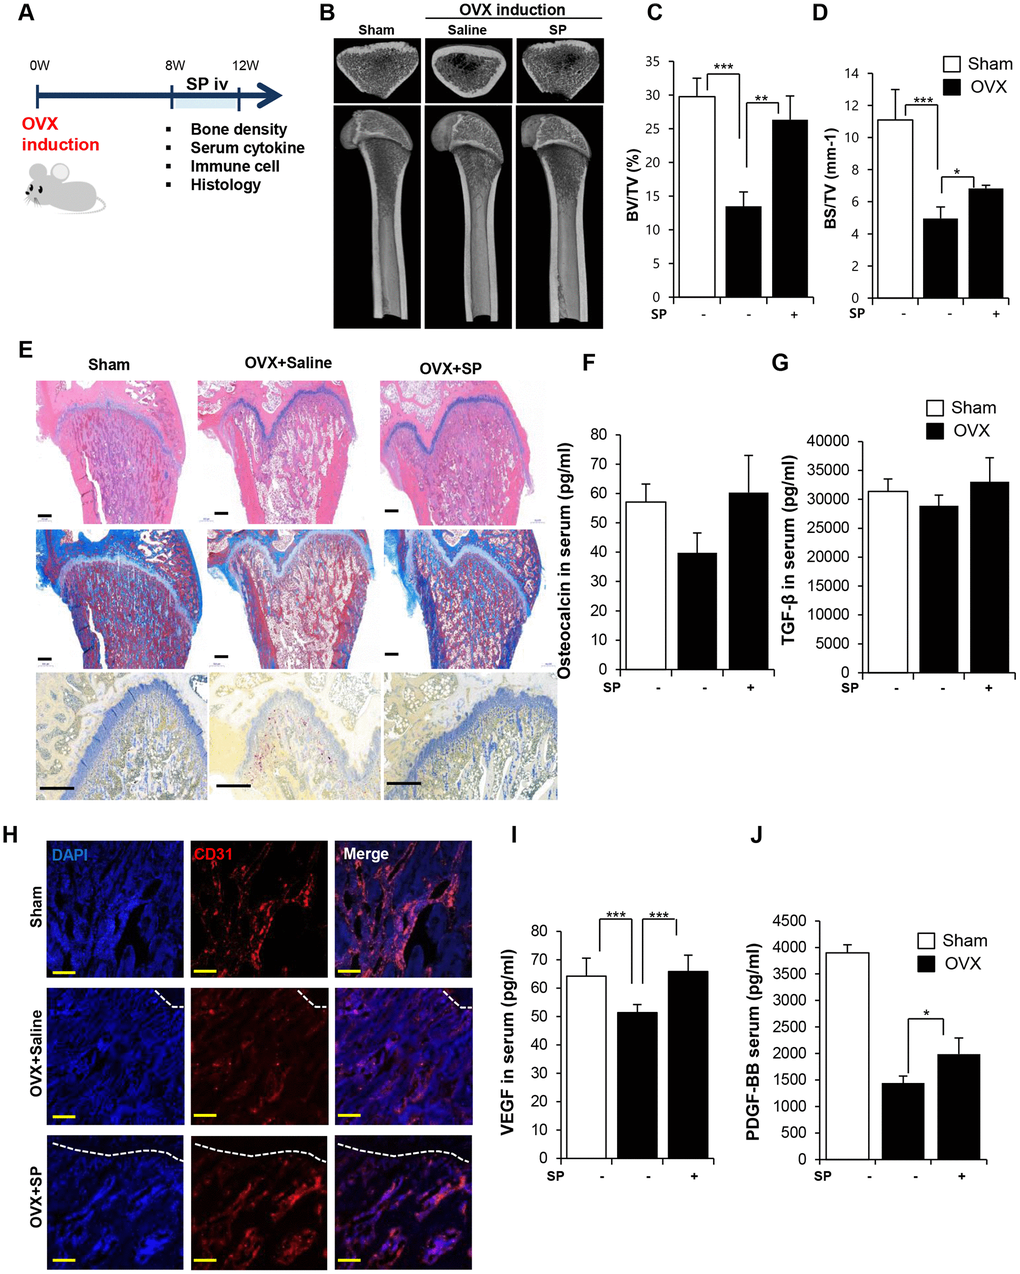 SP ameliorates bone loss, preserving vasculature and angiogenic factors. (A) Experimental schedule for OVX and SP treatment. (B) Representative femoral μCT images. (C, D) Quantitative analyses of the trabecular bone fraction of femora from rats. (E) H&E, Masson’s Trichrome and TRAP staining of distal femoral metaphysis regions. Scale bar: 500 μm. (F, G) The level of osteocalcin and TGF-β in the blood was elucidated by ELISA. (H) Images of immunofluorescence staining for CD31 (red) in distal femoral metaphysis from rat after sham-operation, OVX and OVX with SP treatment. GP: growth plate. Scale bar: 200 μm. (I, J) The concentration of VEGF and PDGF-BB in the blood was analyzed by ELISA. BV: trabecular bone volume. TV: tissue volume. BS: bone surface. p values of less than 0.05 were considered statistically significant (* p 